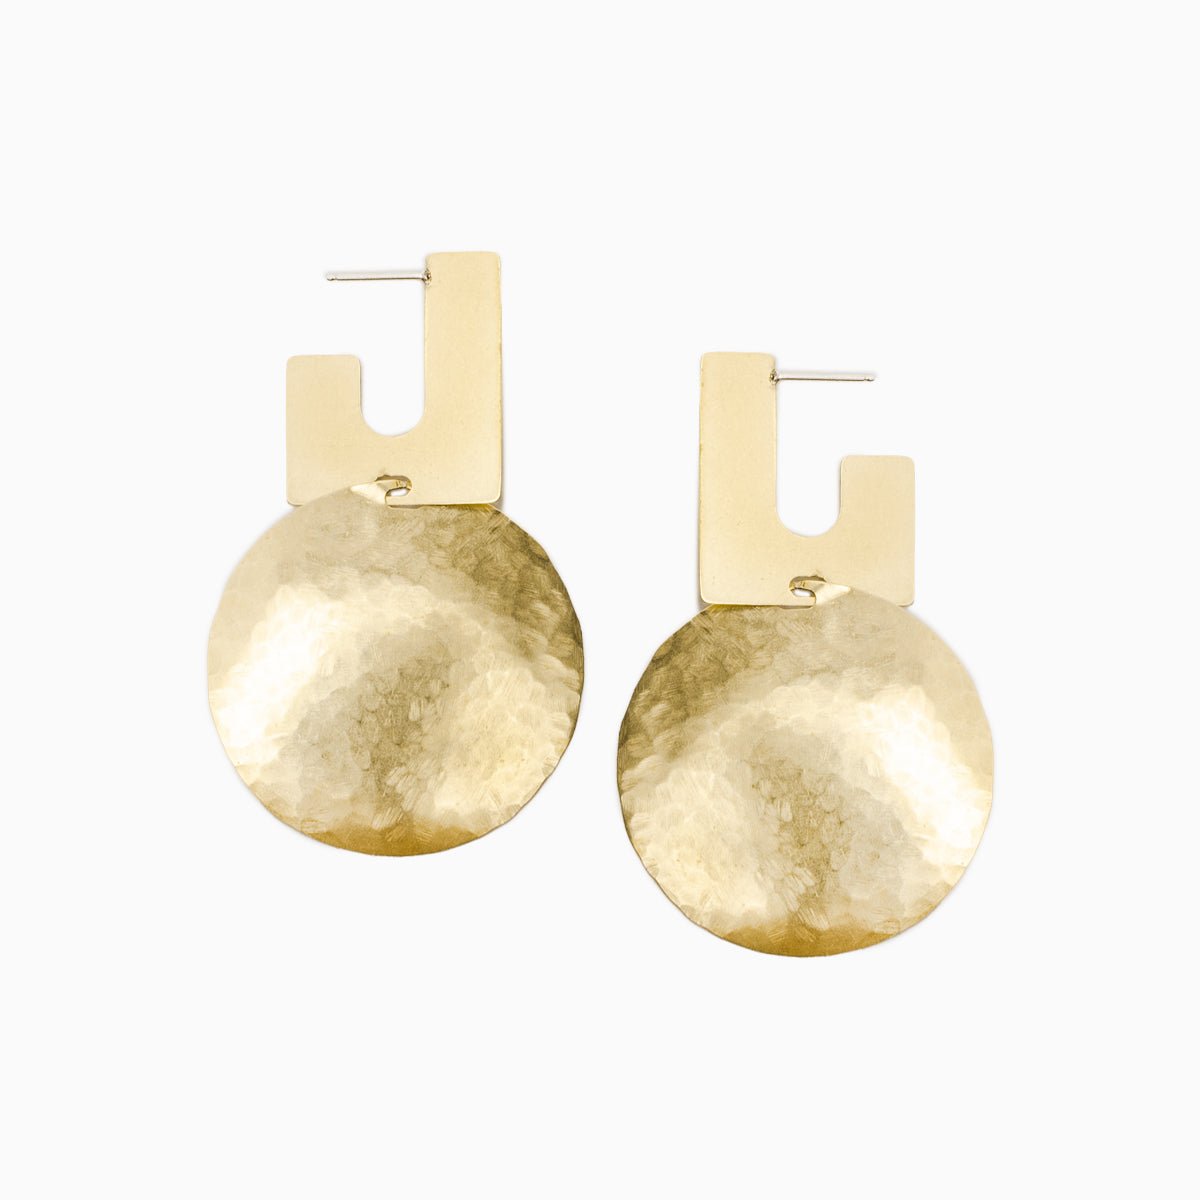 A squared off u-shaped stud earring connected with a large hammered circular disk. The Candetta Earrings are designed and handcrafted in Portland, Oregon.